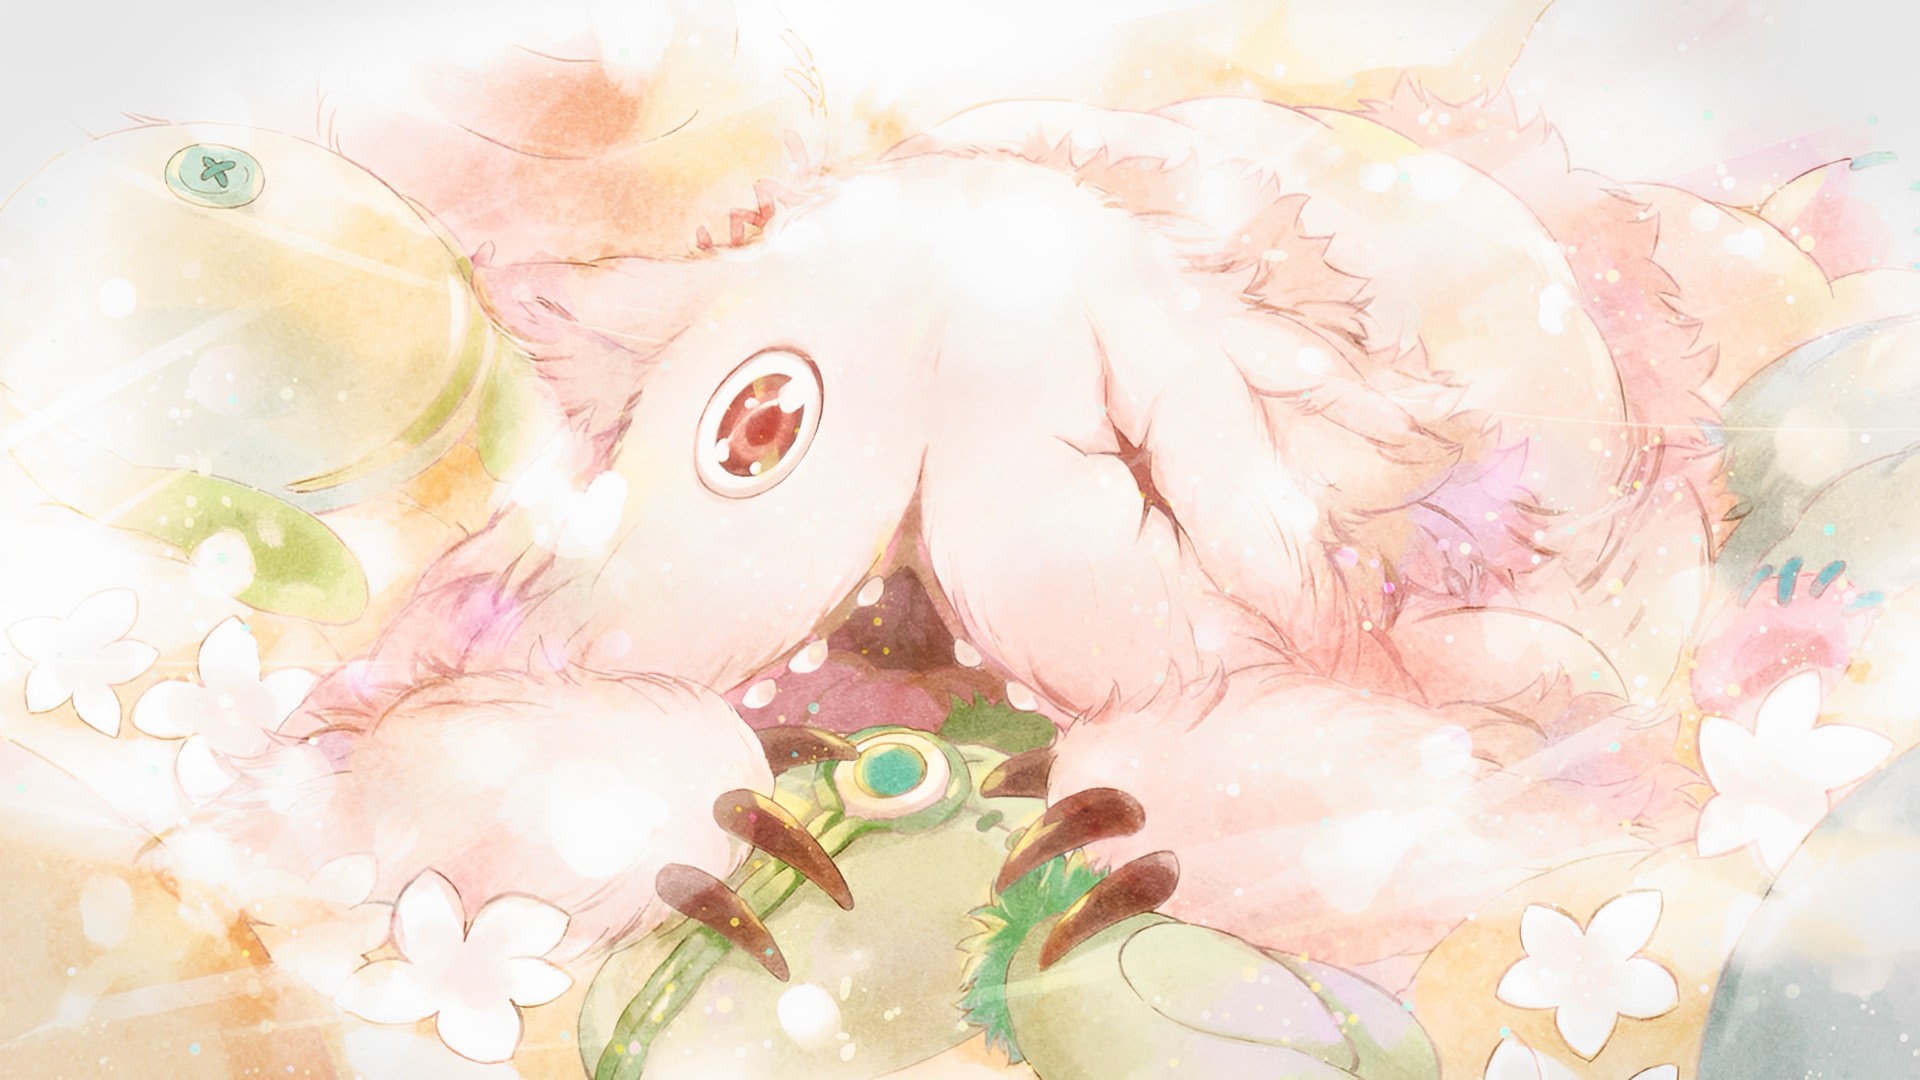 Made in Abyss: Dawn of the Deep Soul HD Wallpapers and Backgrounds